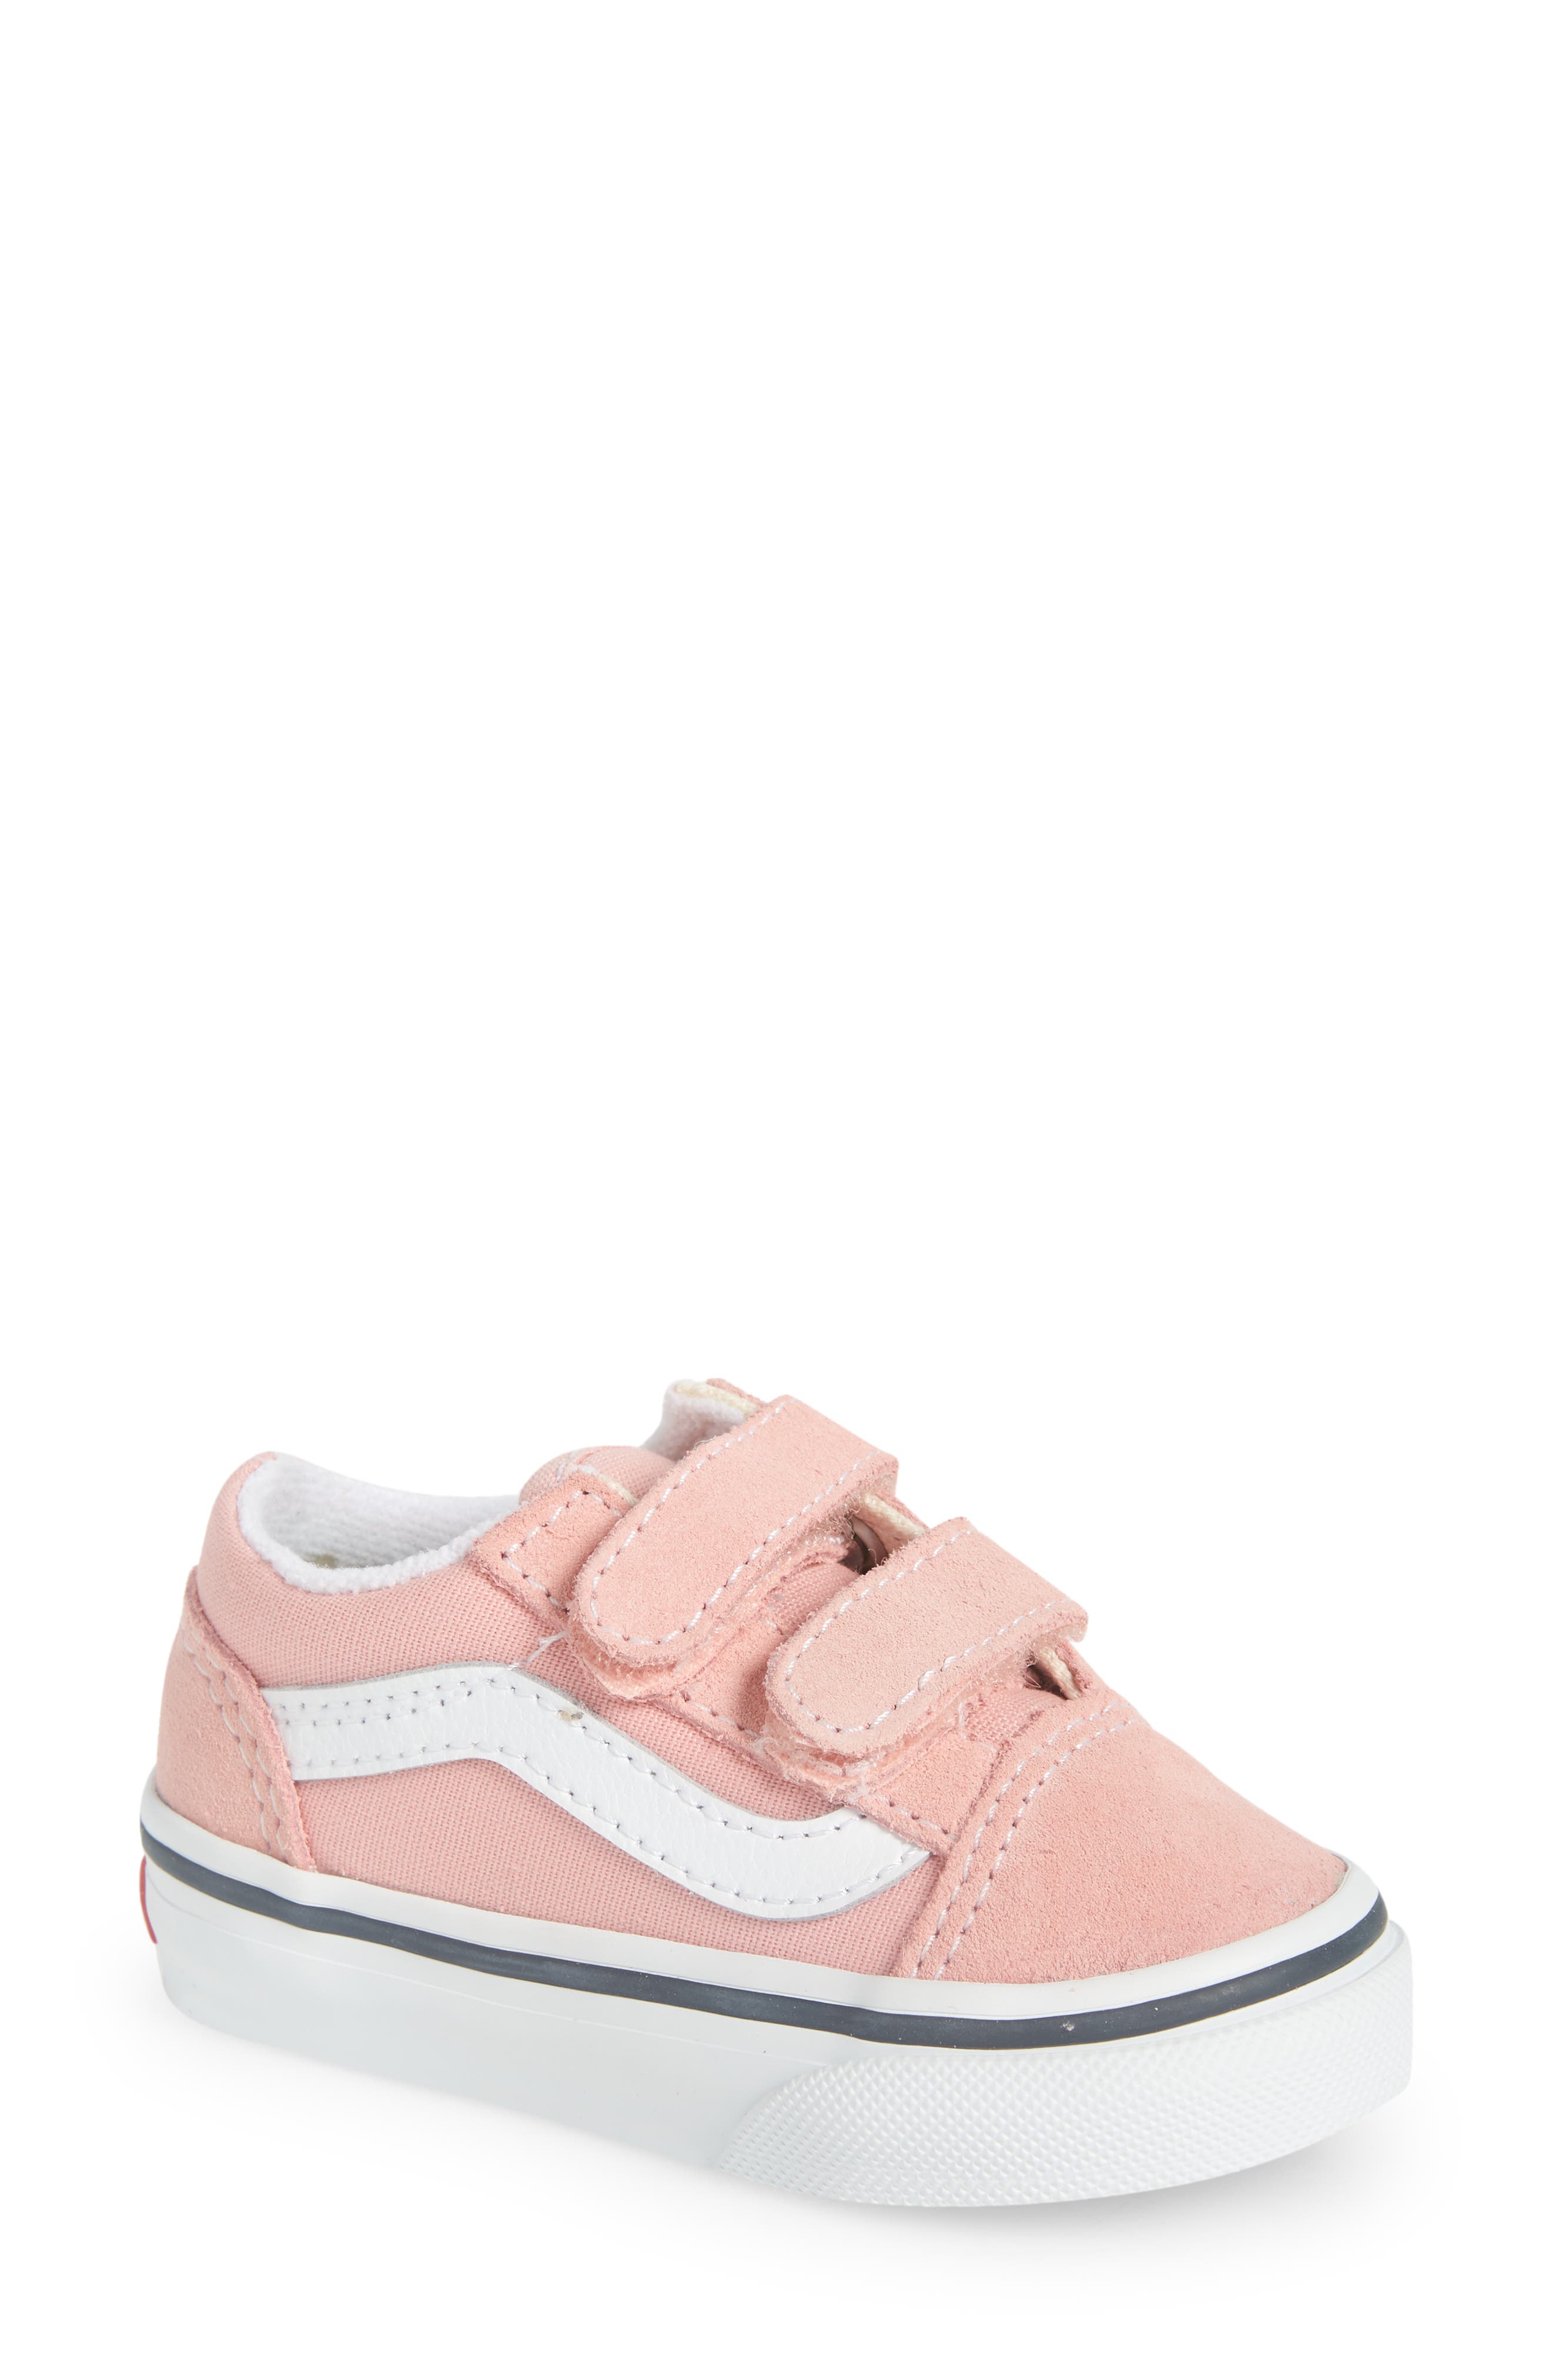 vans shoes for girls for sale